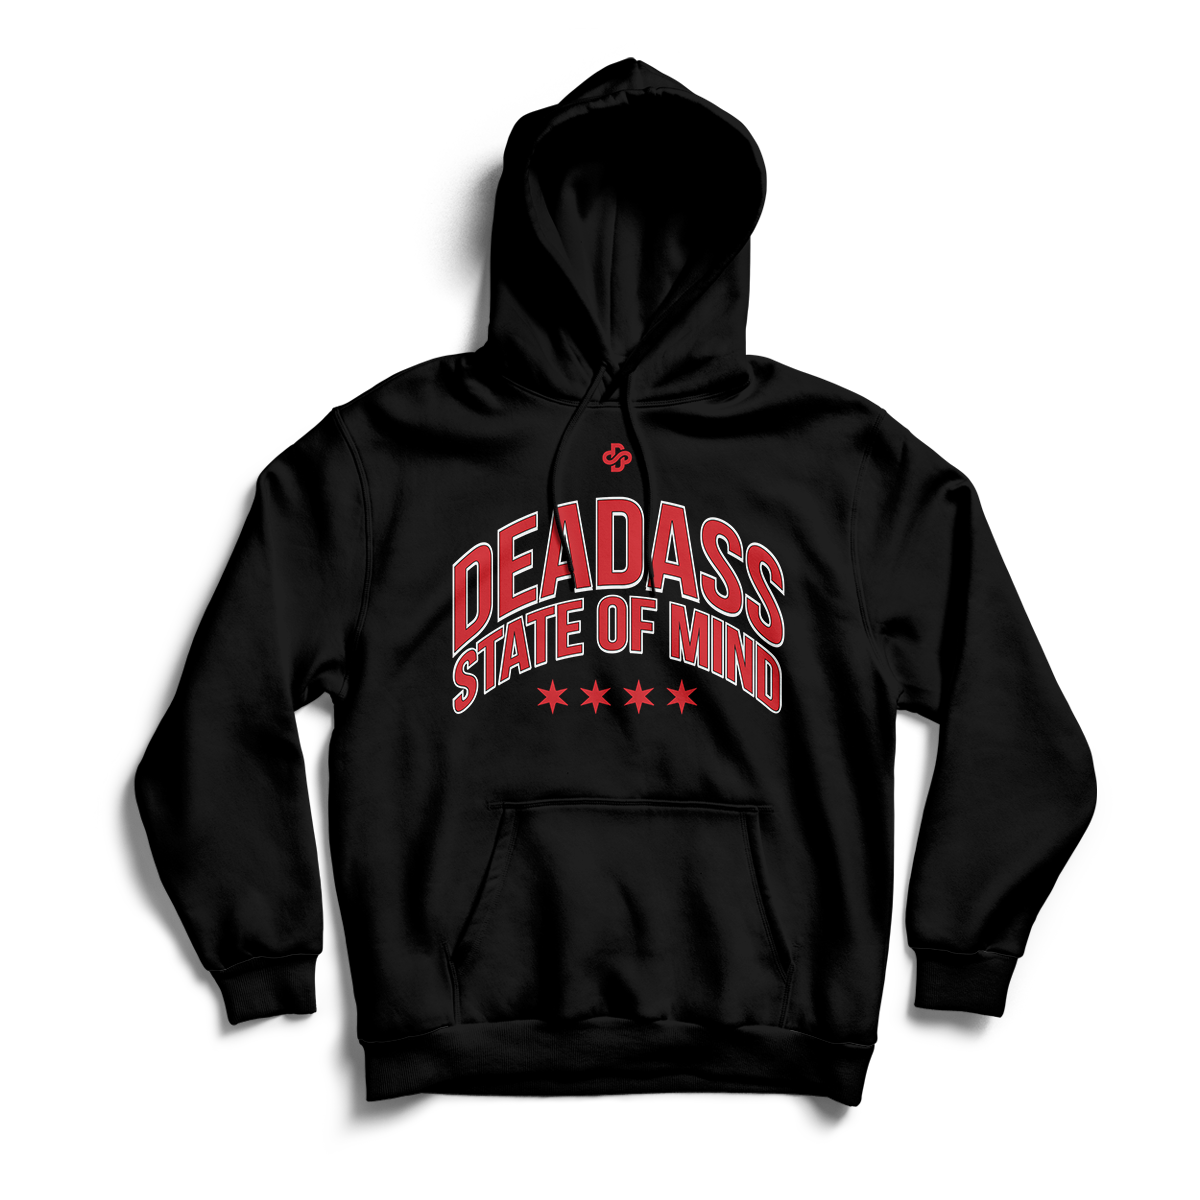 'Deadass State of Mind' in Gym Red CW Unisex Pullover Hoodie